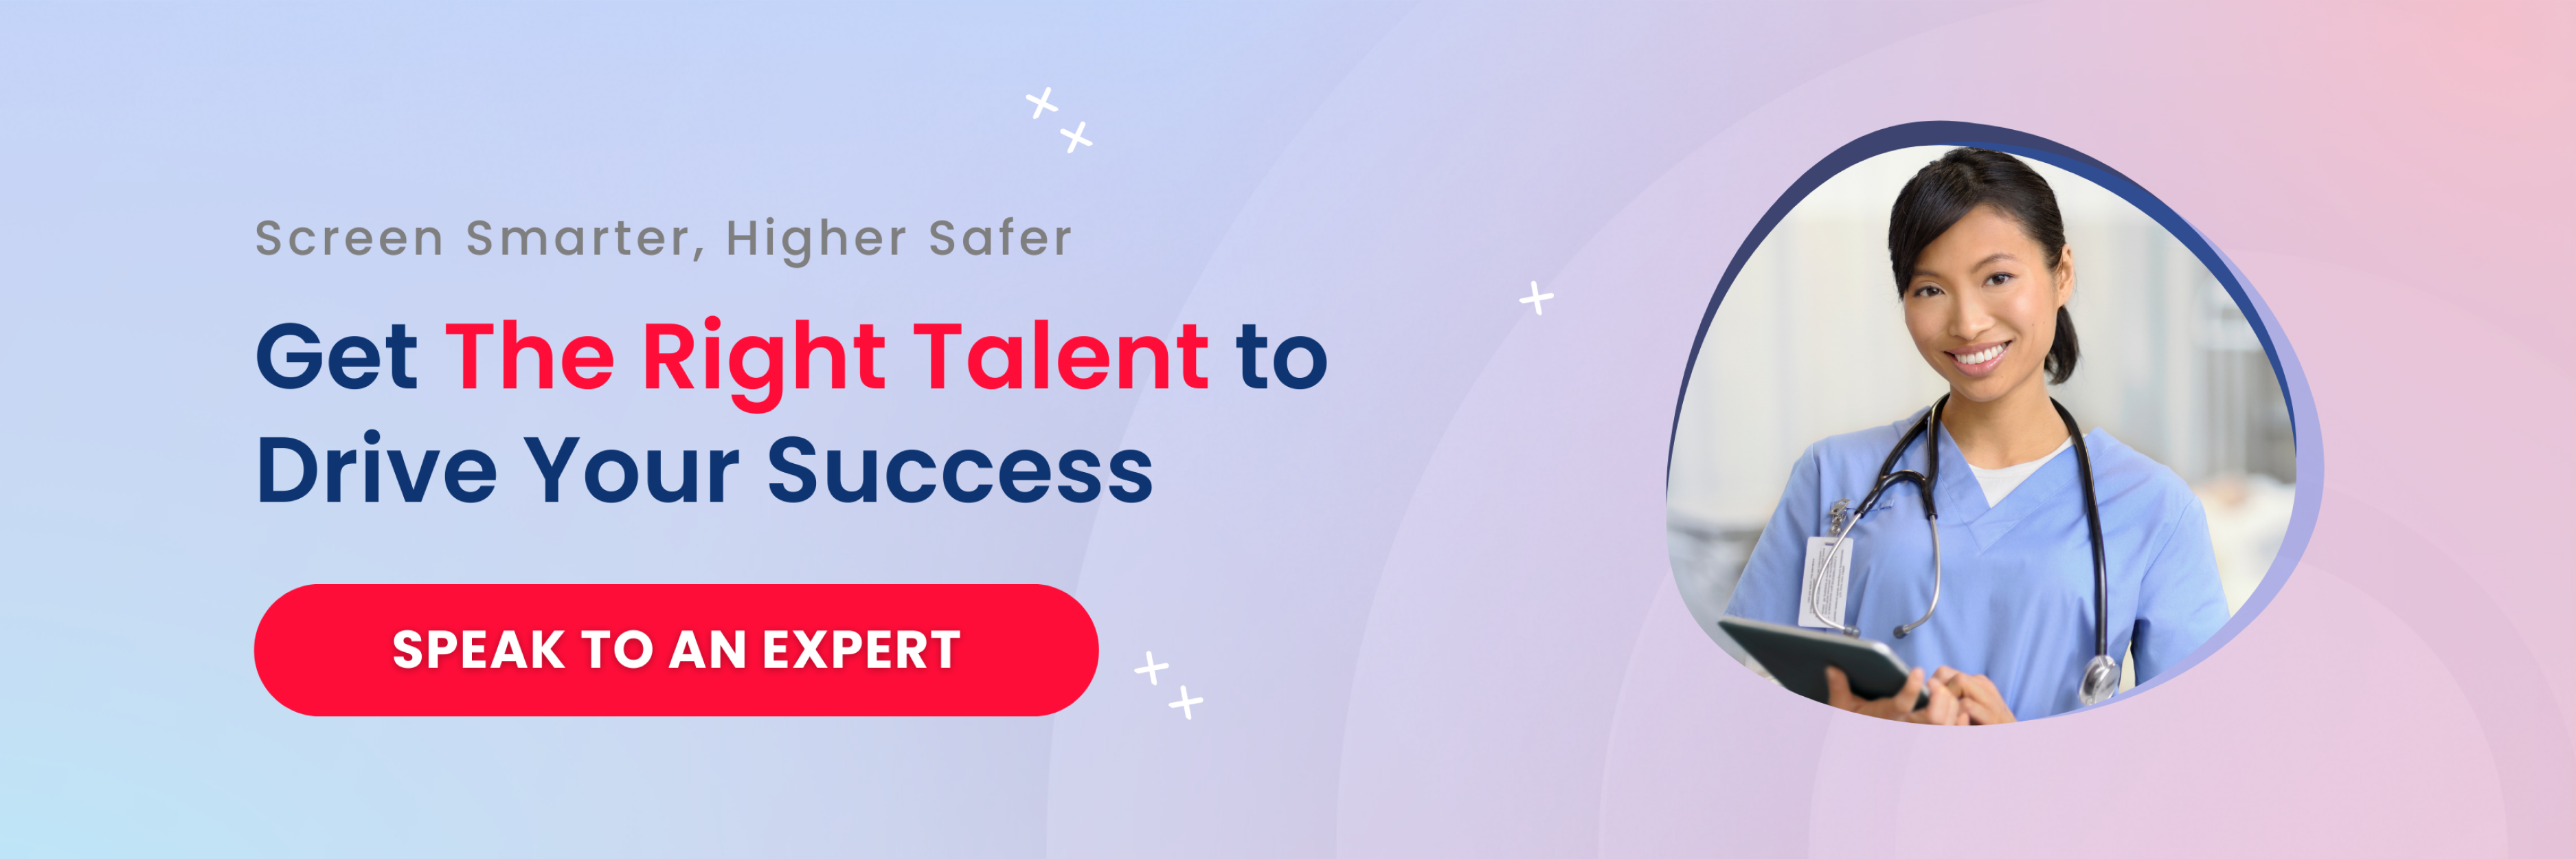 Screen smarter, hire safer. Get the right talent to drive your success. Speak to an expert.